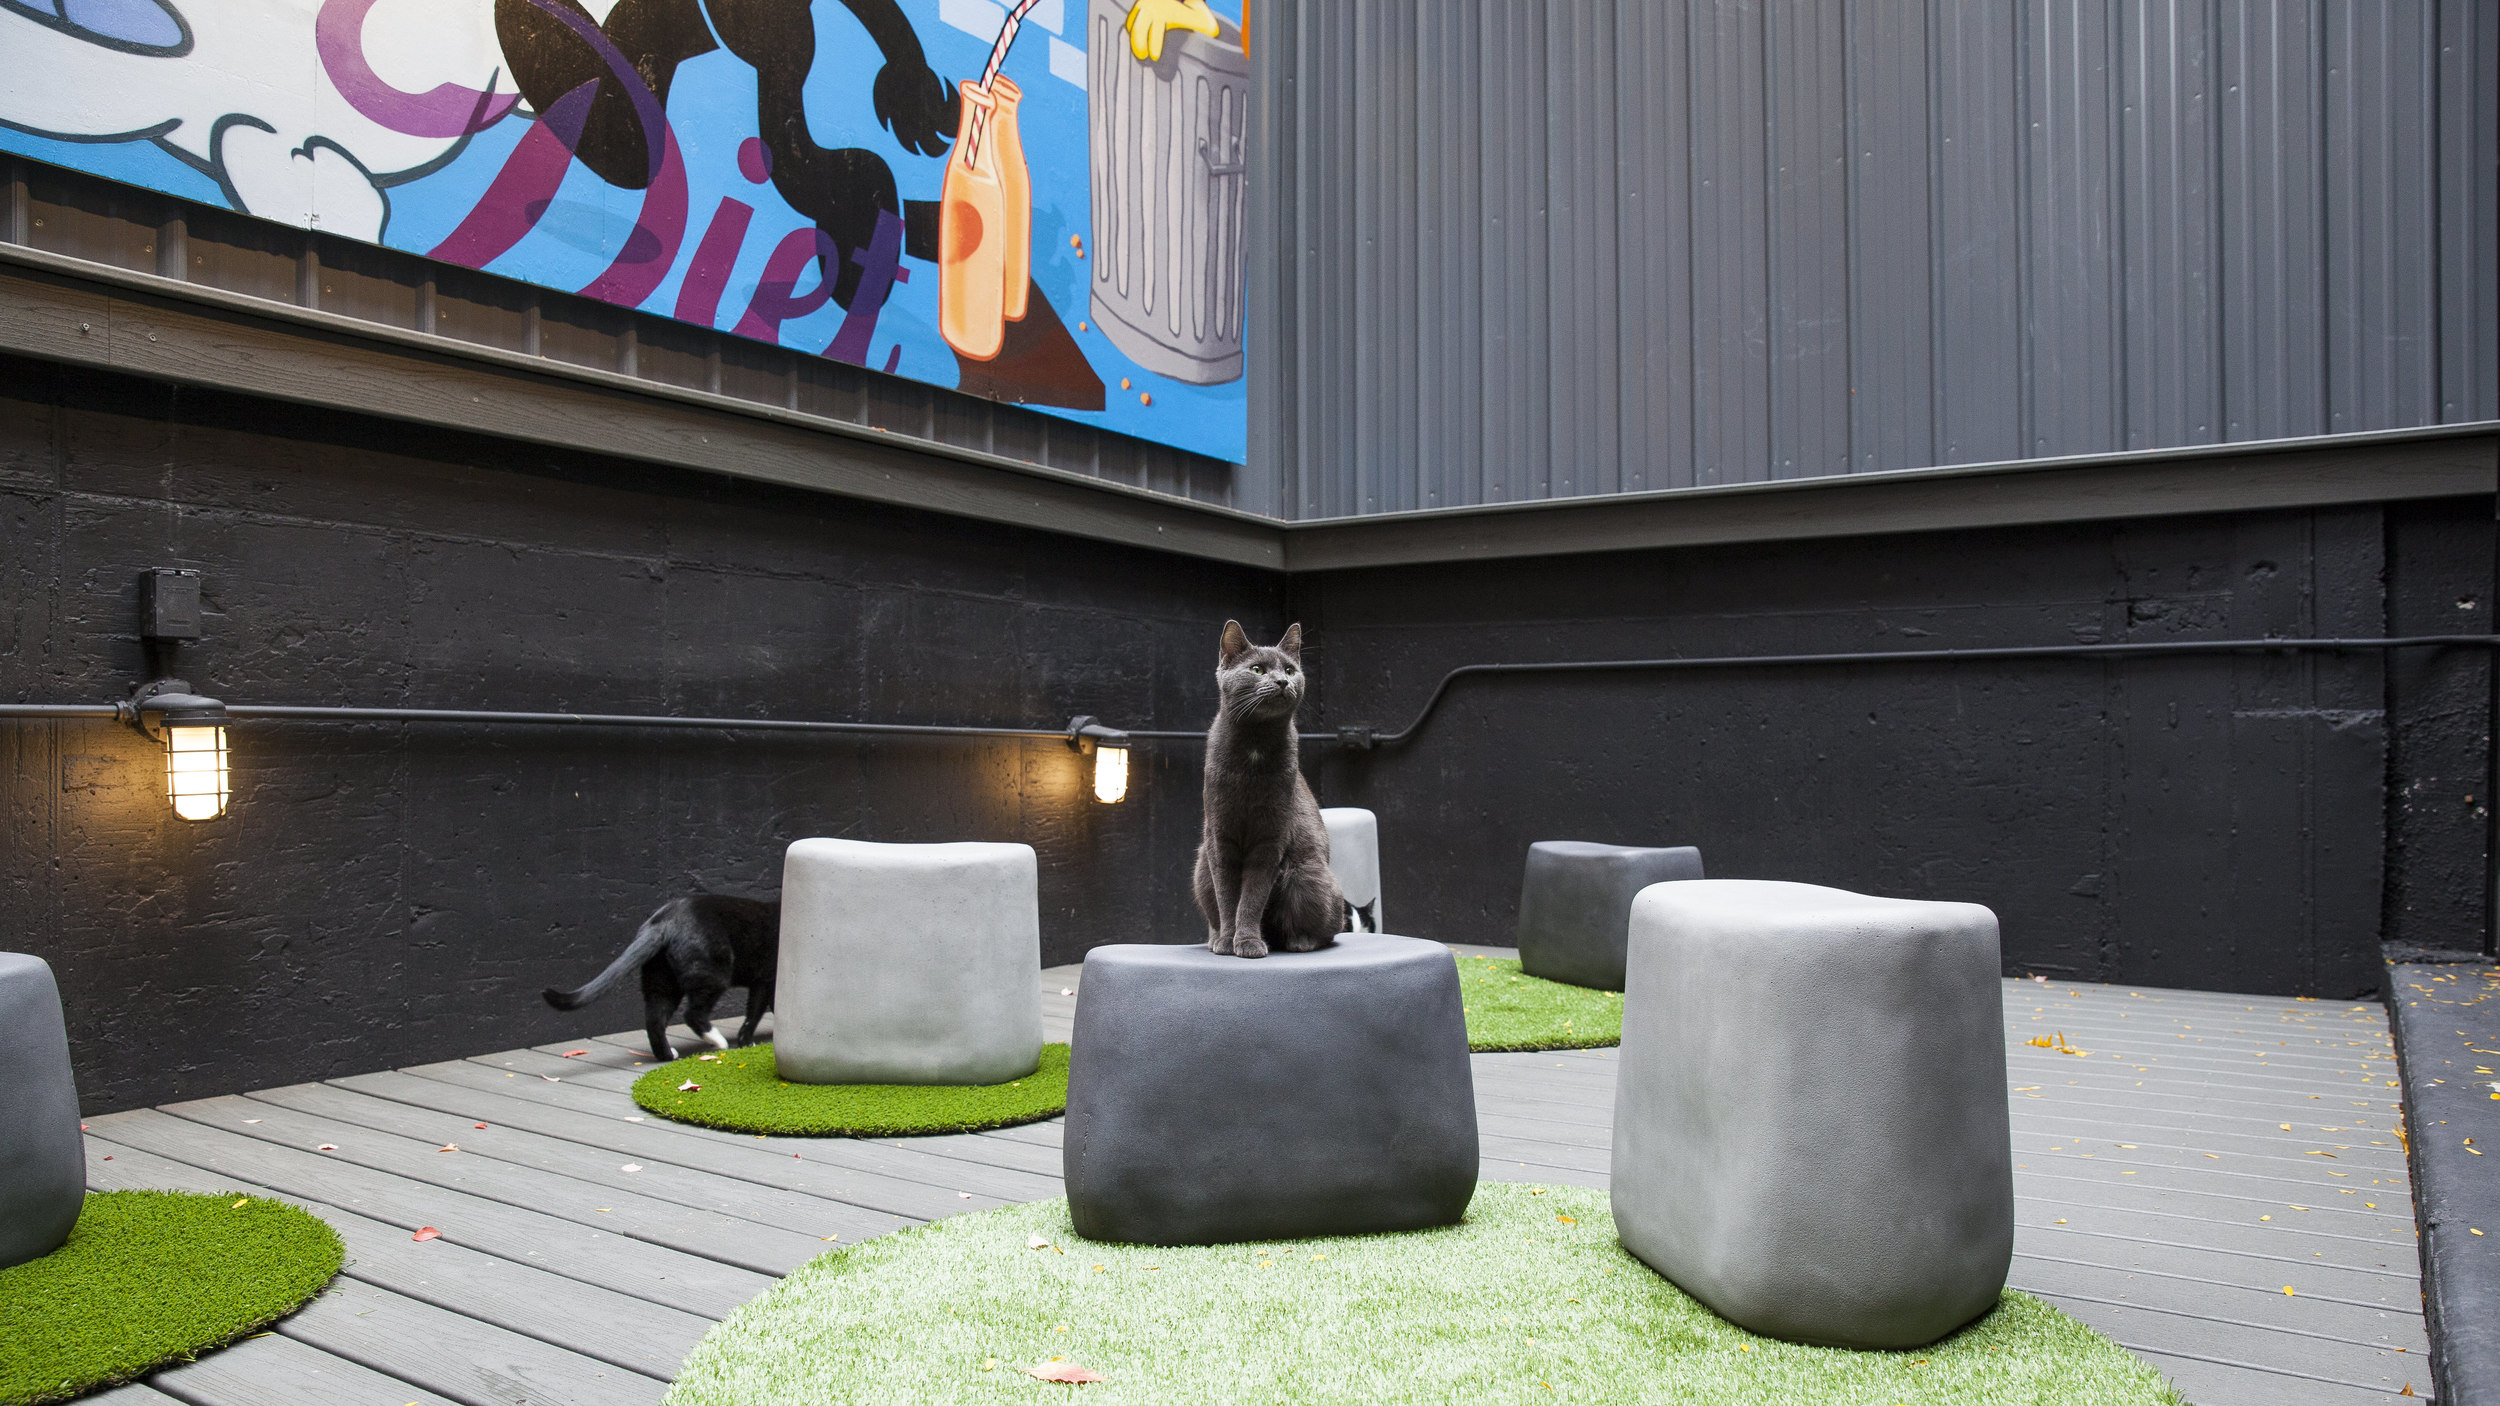 49 Best Pictures Cat Cafe New York Manhattan : Cat Cafe Offering Feline And Caffeine Fix Comes To New York City Wsj